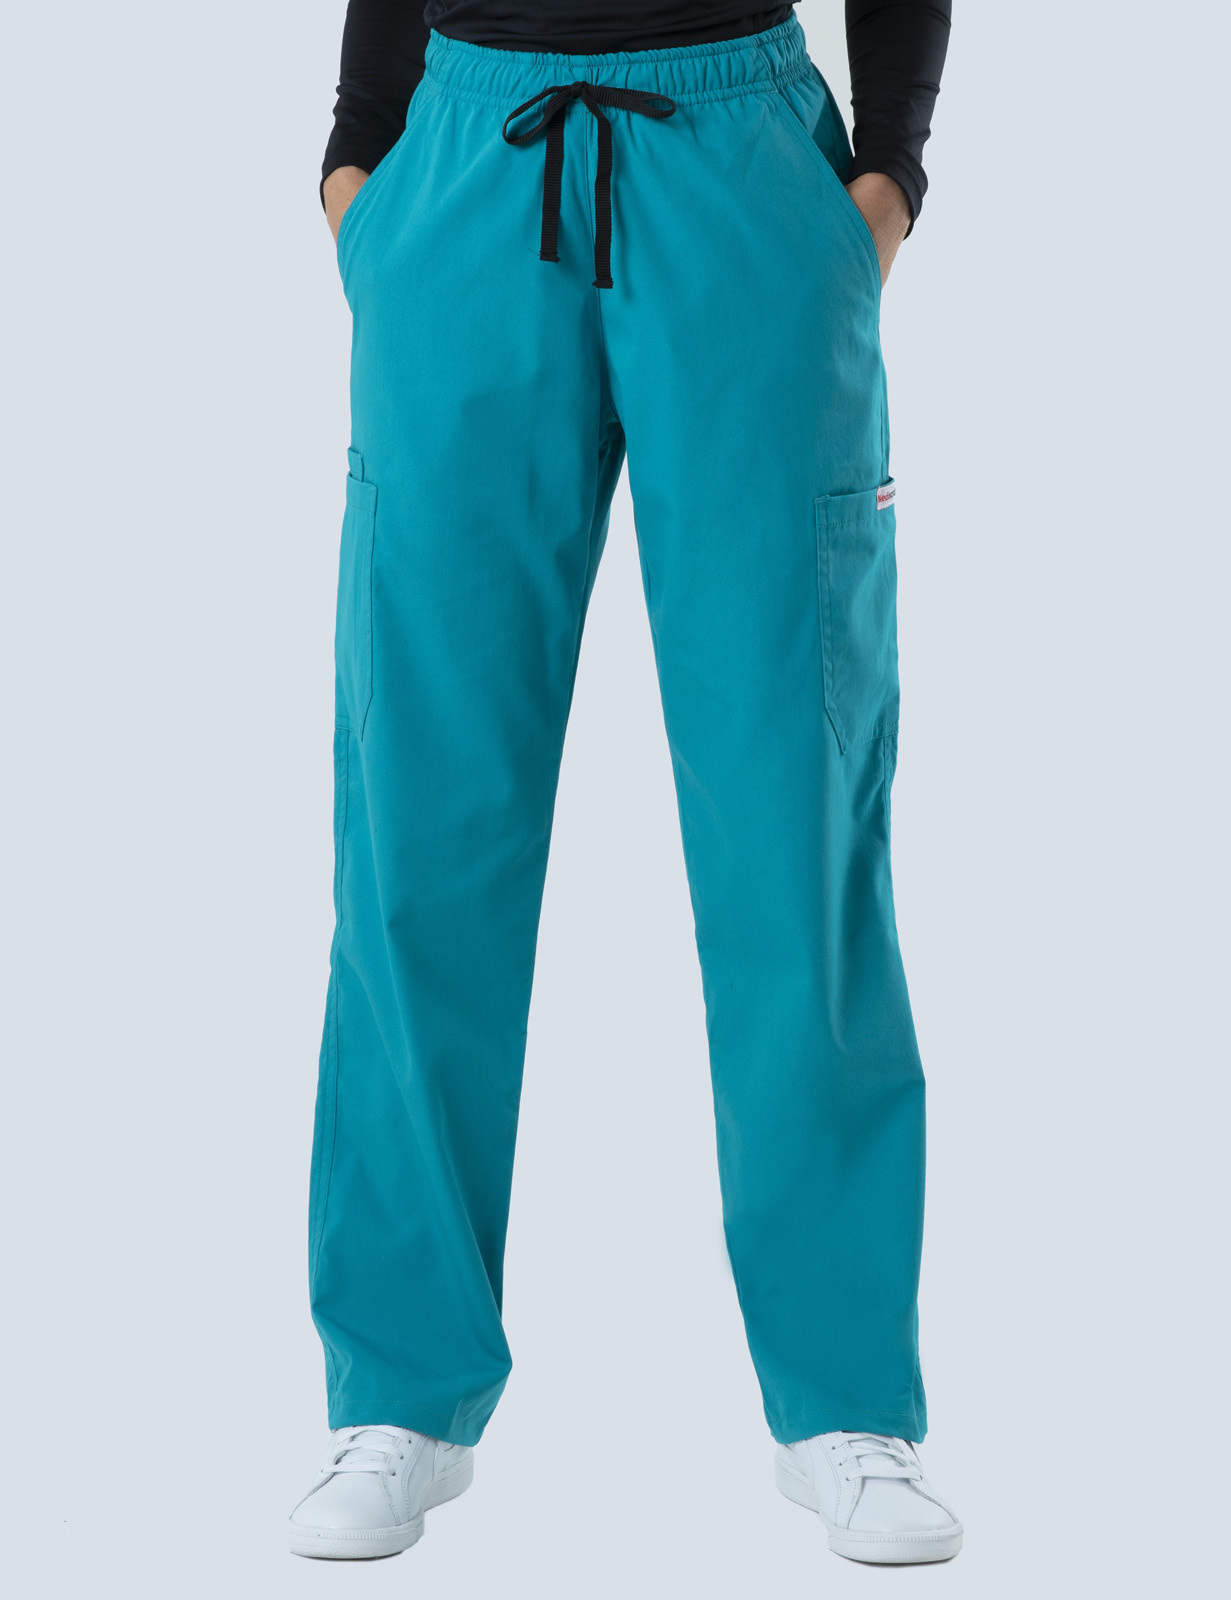 Prince Charles Hospital - ED RN (4 Pocket Scrub Top and Cargo Pants in Teal incl Logos)